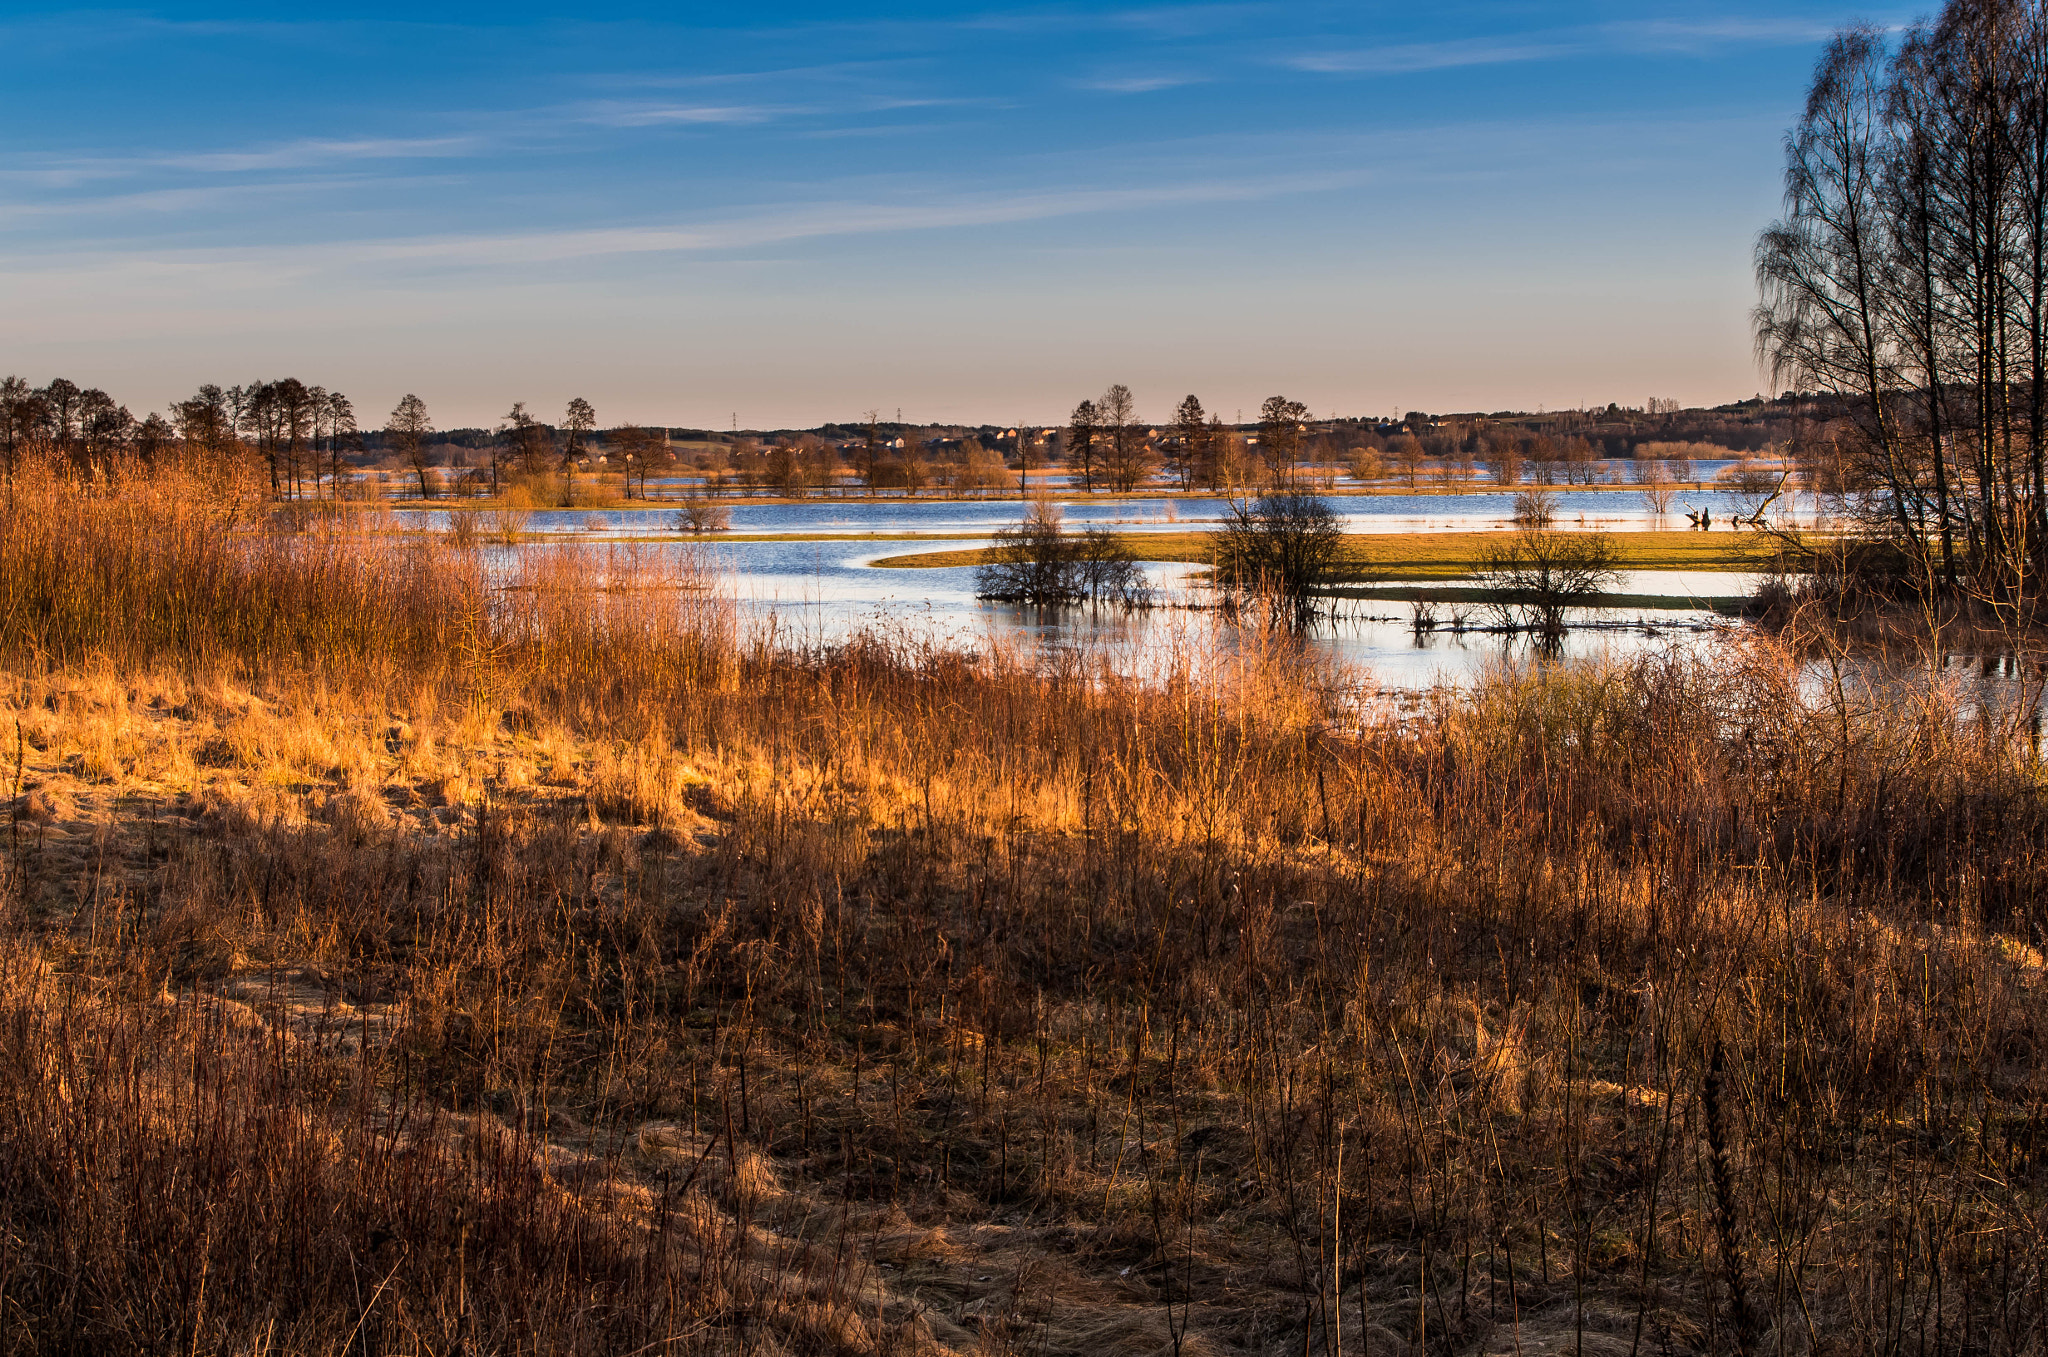 Pentax K-50 sample photo. The "narew" river valley photography